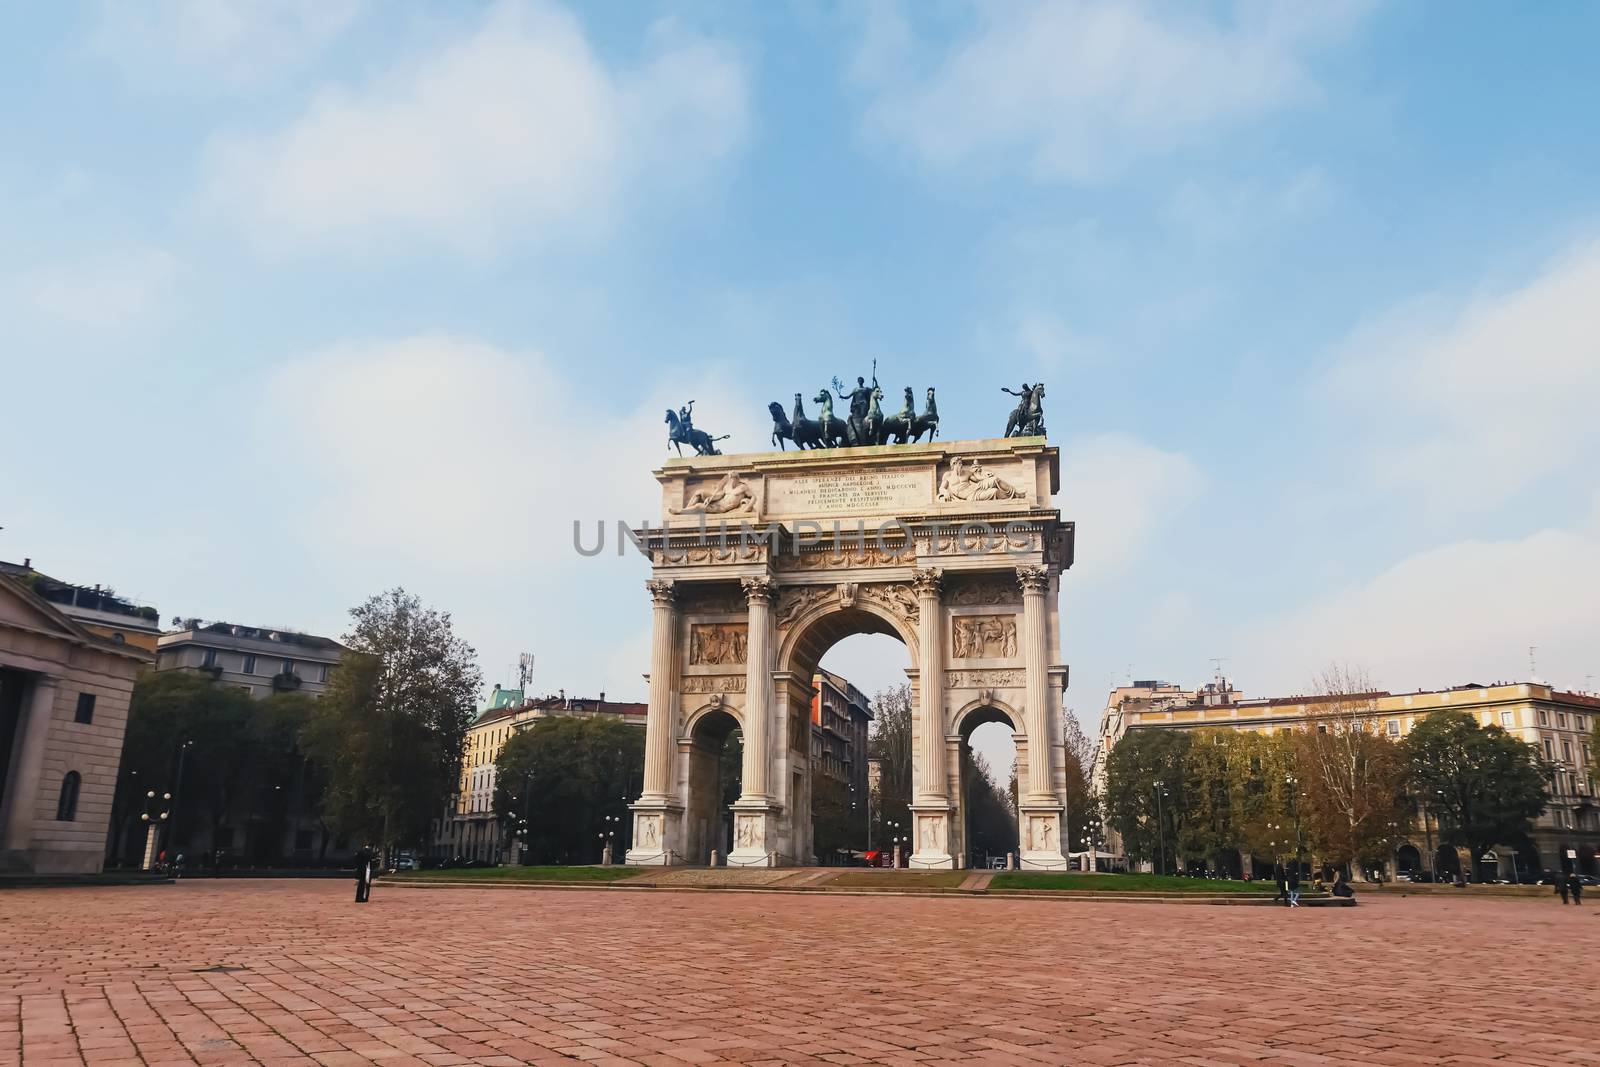 Triumphal arch called Arco della Pace means The Arch of Peace in by Anneleven